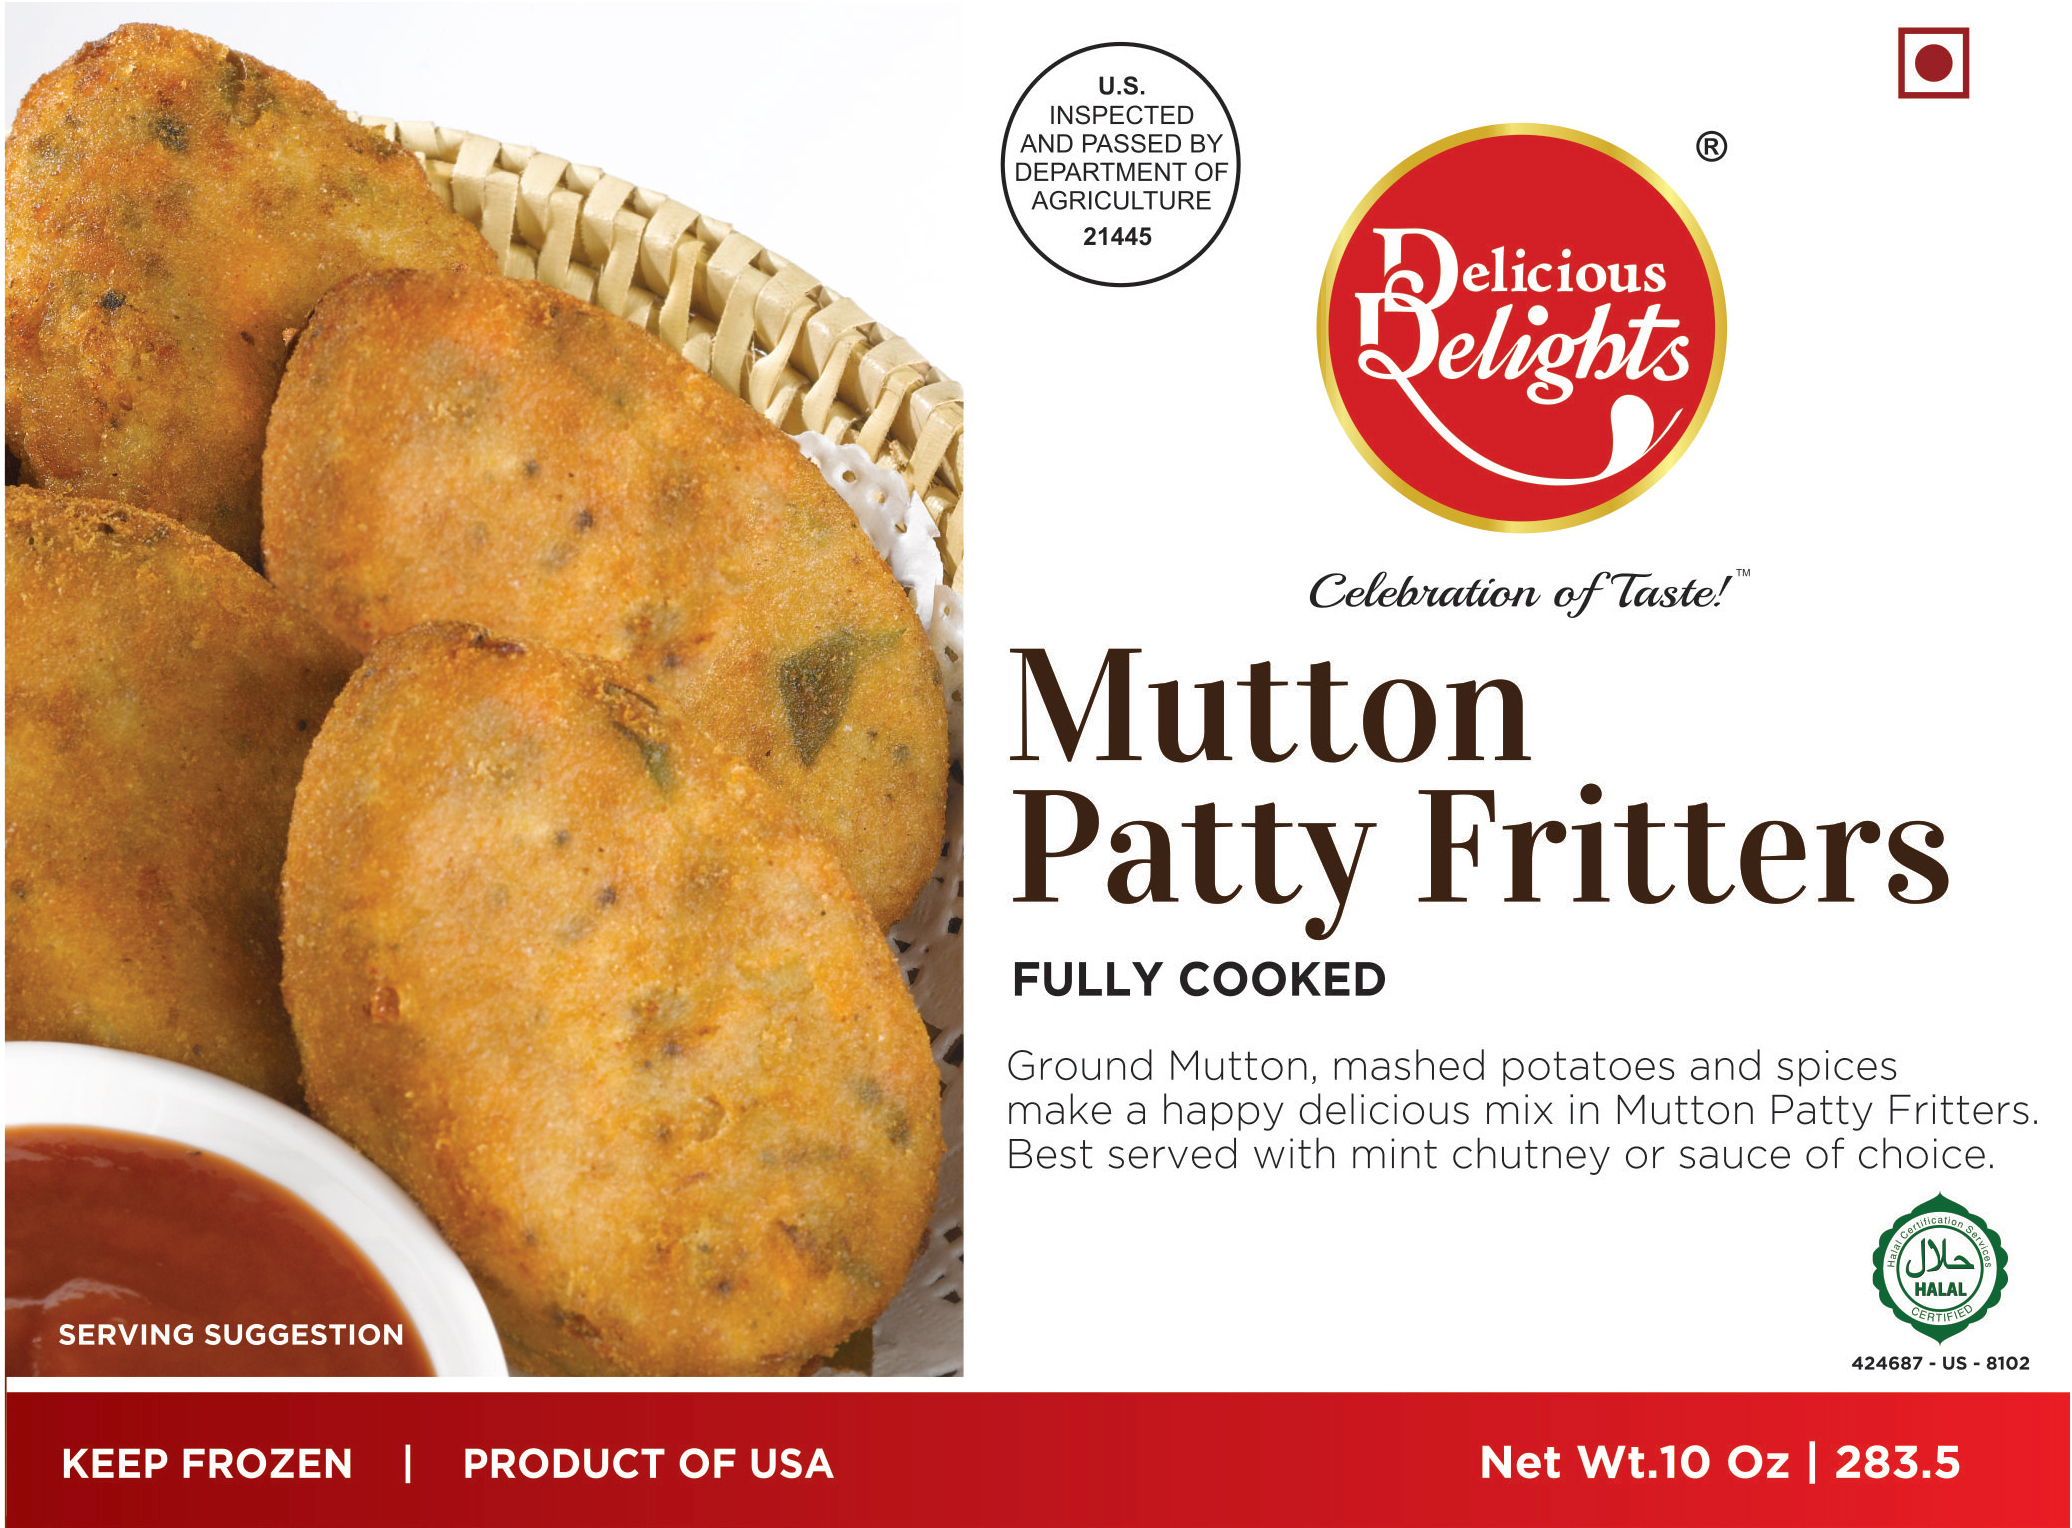 Delicious Delights Mutton Patty Fritters